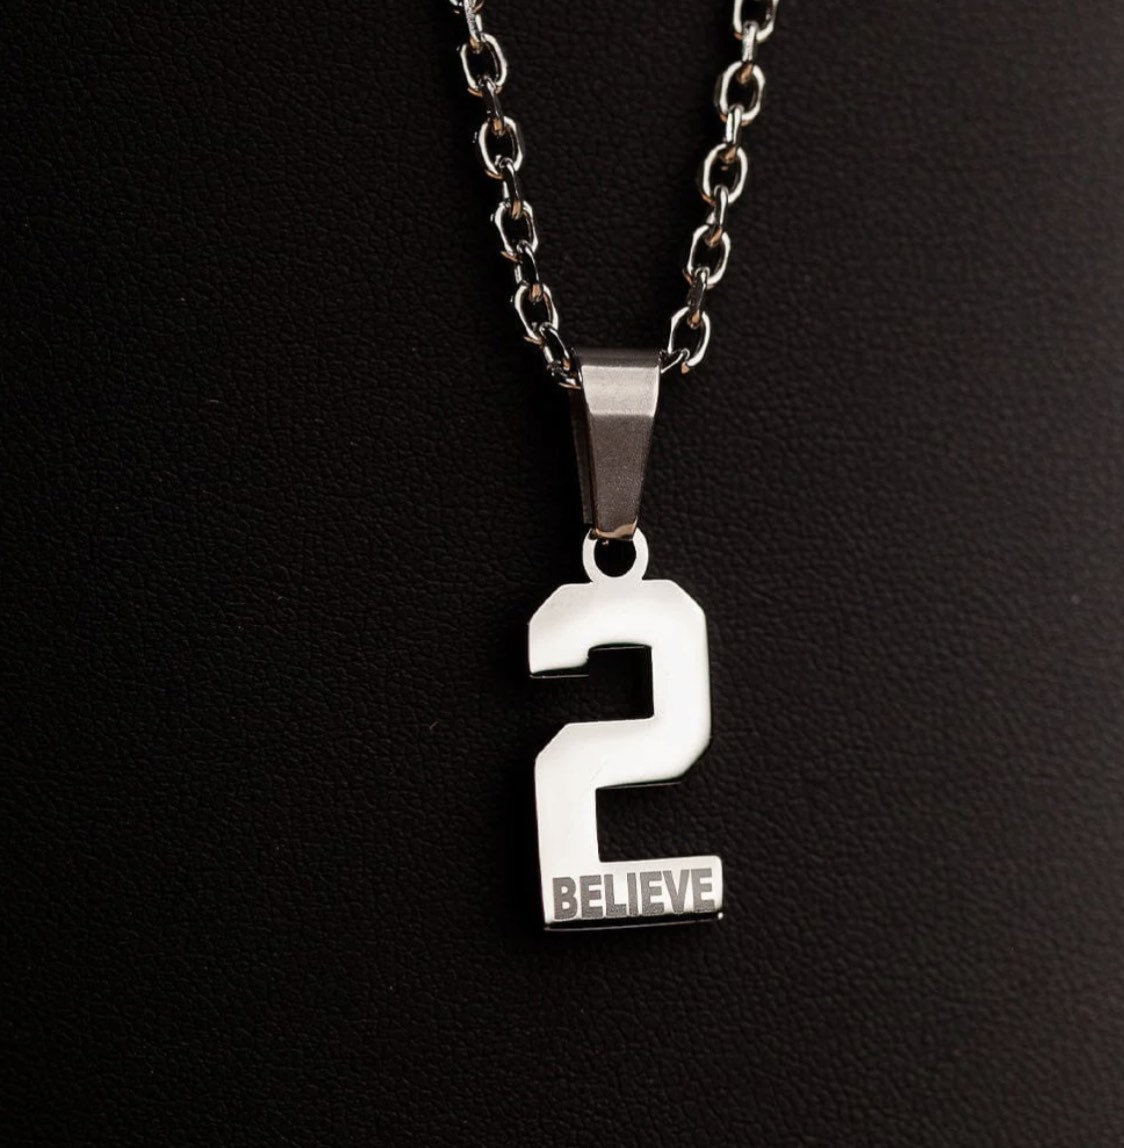 21 - 21 Number Necklace - Chain - Pendant - FlowX Jewelry - #21 Necklace - Engraving - Engrave